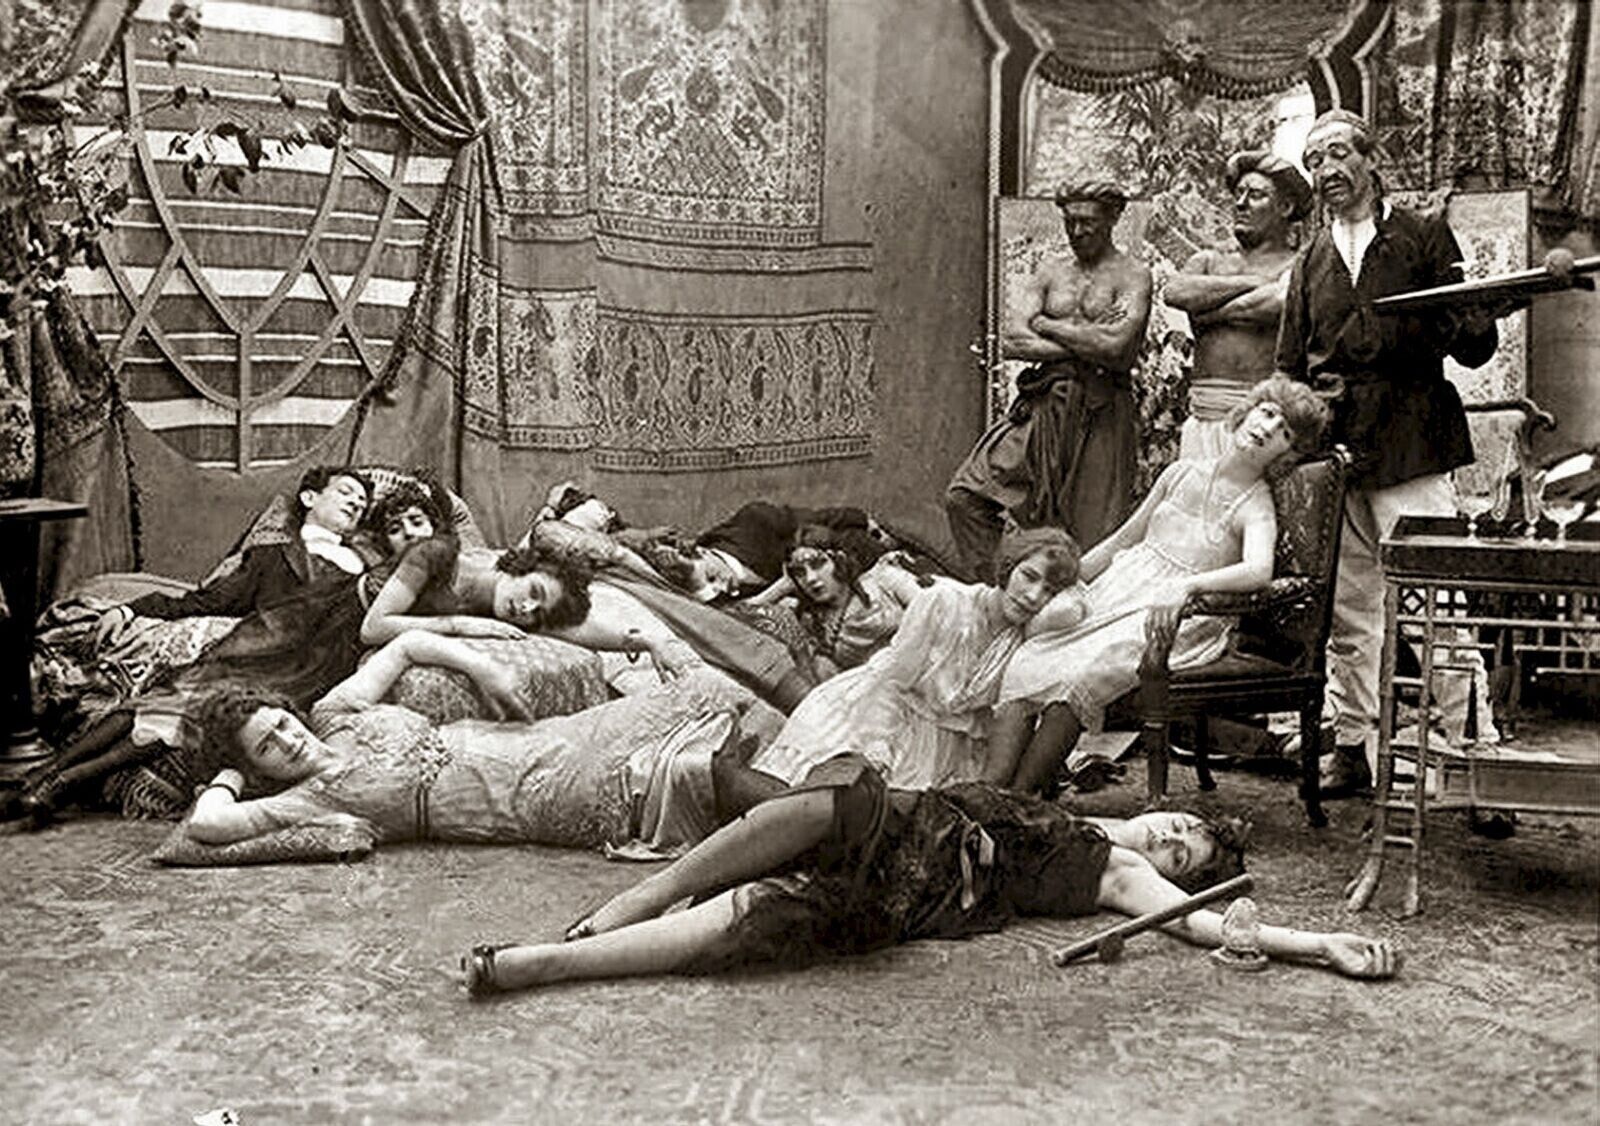 1918 FRENCH OPIUM Den Drug Party Classic Historic Poster Photo 11x17